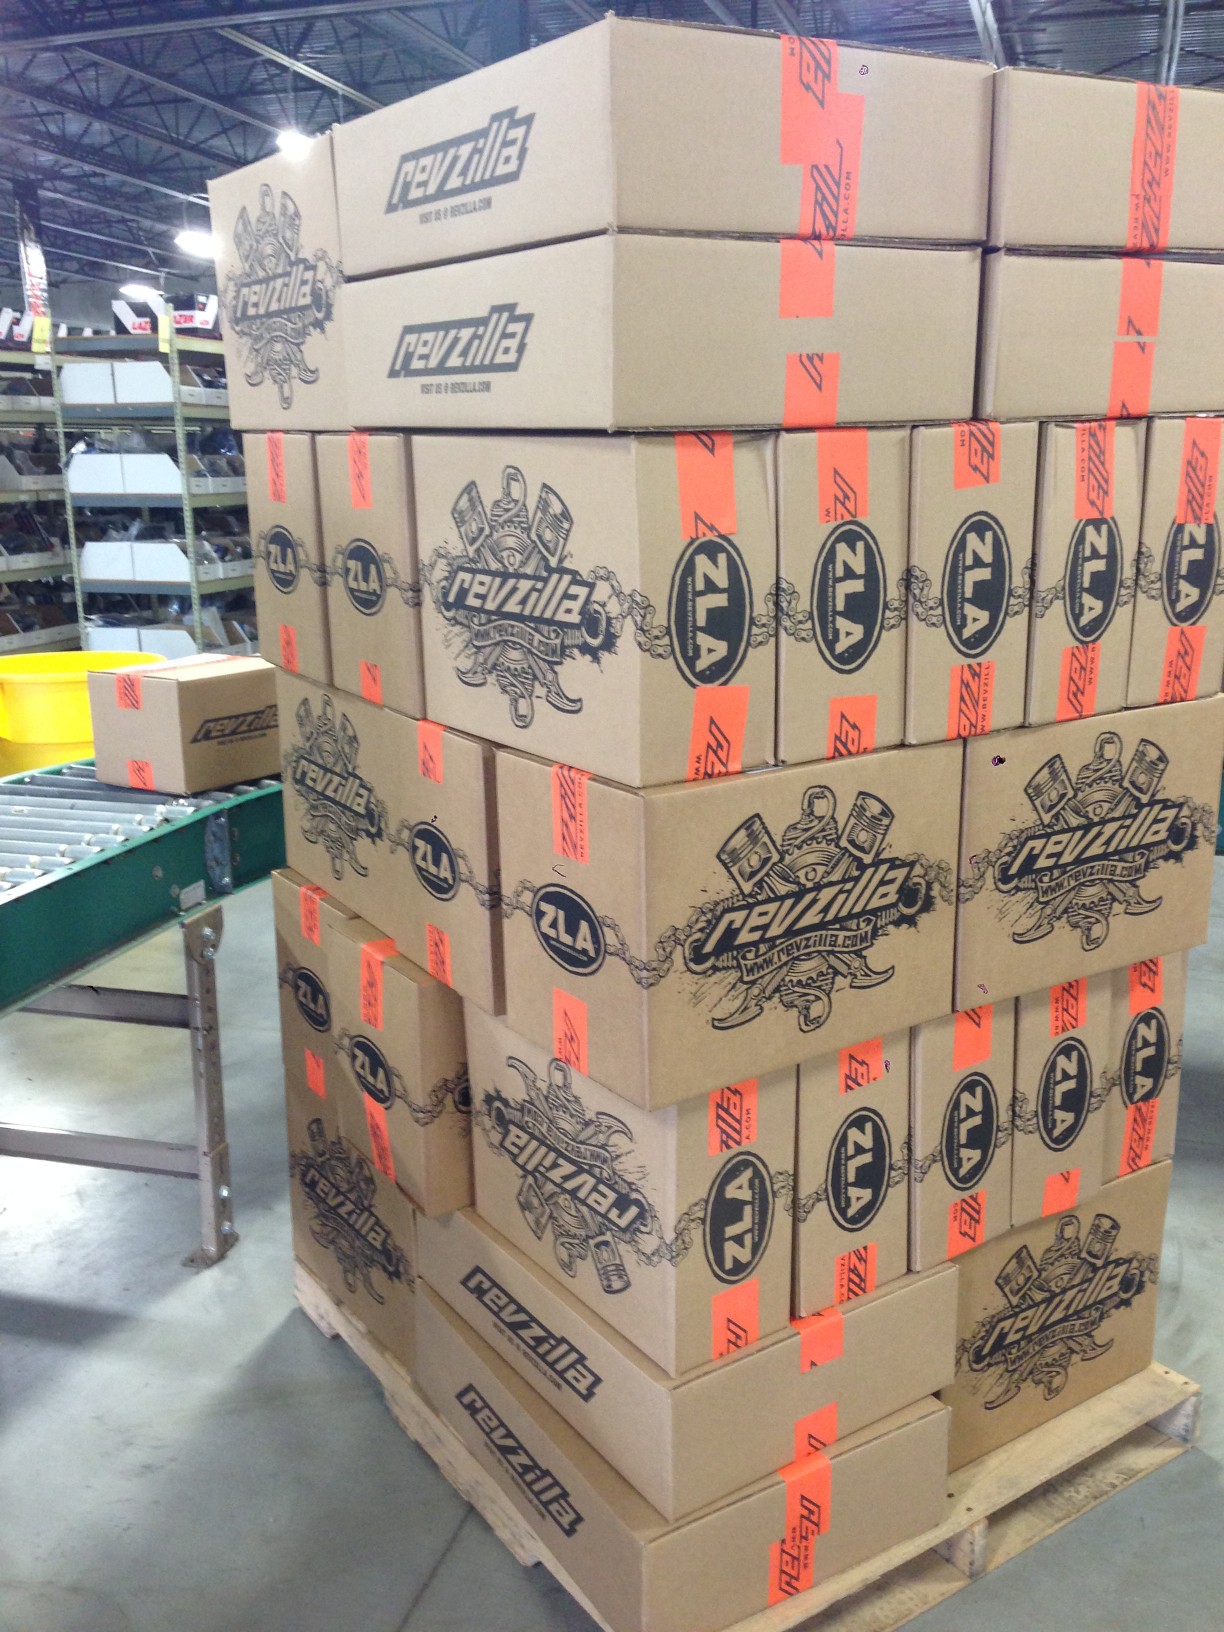 Revzilla Shipping cartons stacked on a palette